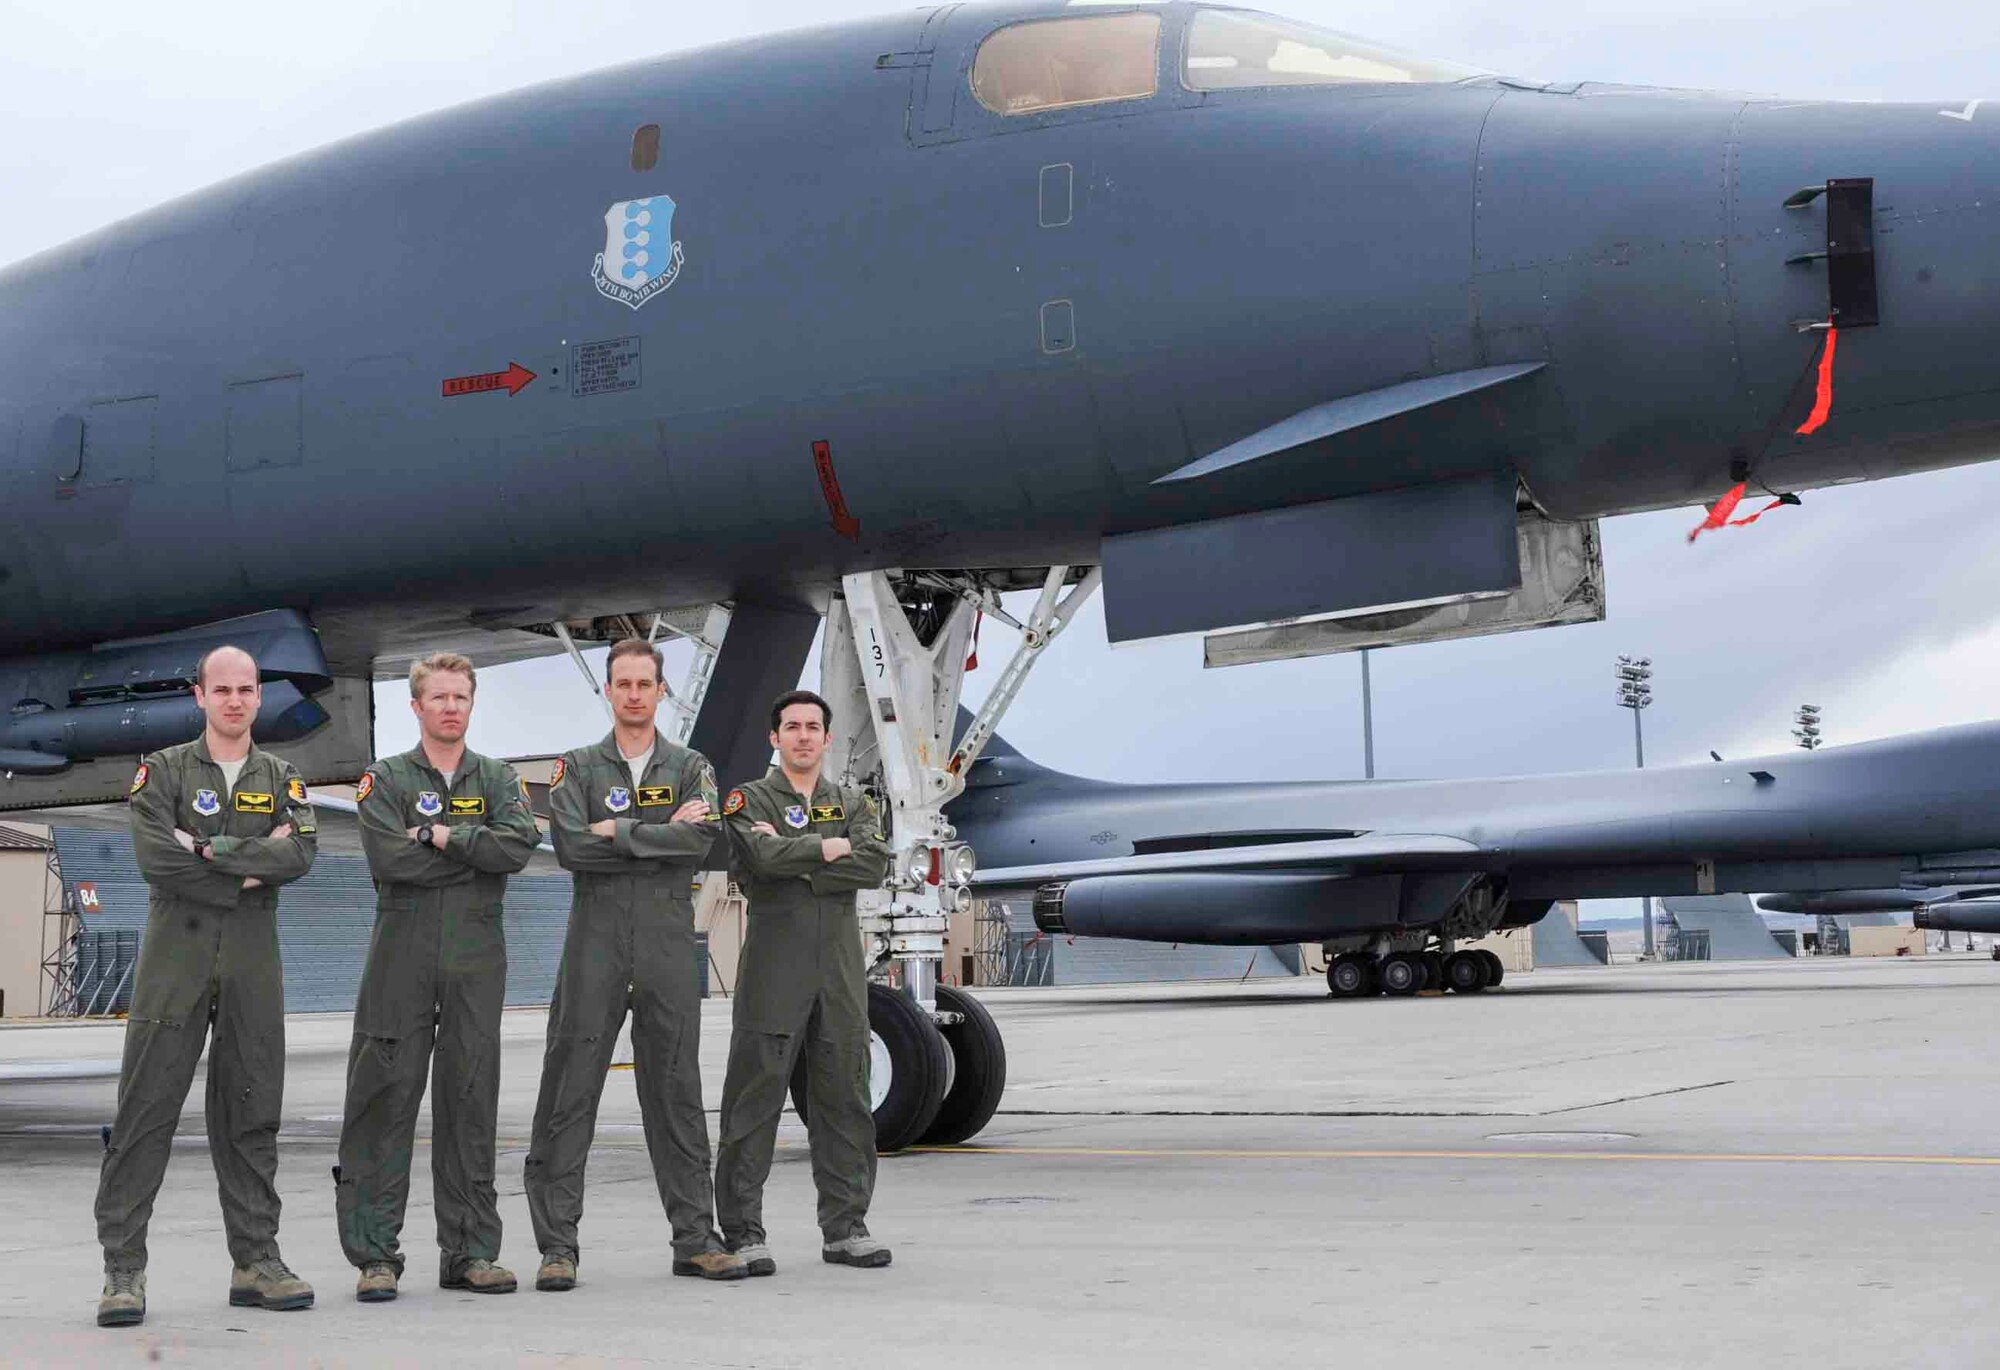 The 2015 General Curtis E. LeMay award winning aircrew from the 37th Bomb Squadron stand next to a B-1 Lancer at Ellsworth Air Force Base, S.D., March 7, 2016. Their success in a bombing mission during Operation Iron Resolve destroyed oil fields supplying income to Islamic State of Iraq and the Levant and won the award for the best bomber crew of 2015. (U.S. Air Force photo by Airman 1st Class Denise M. Jenson)